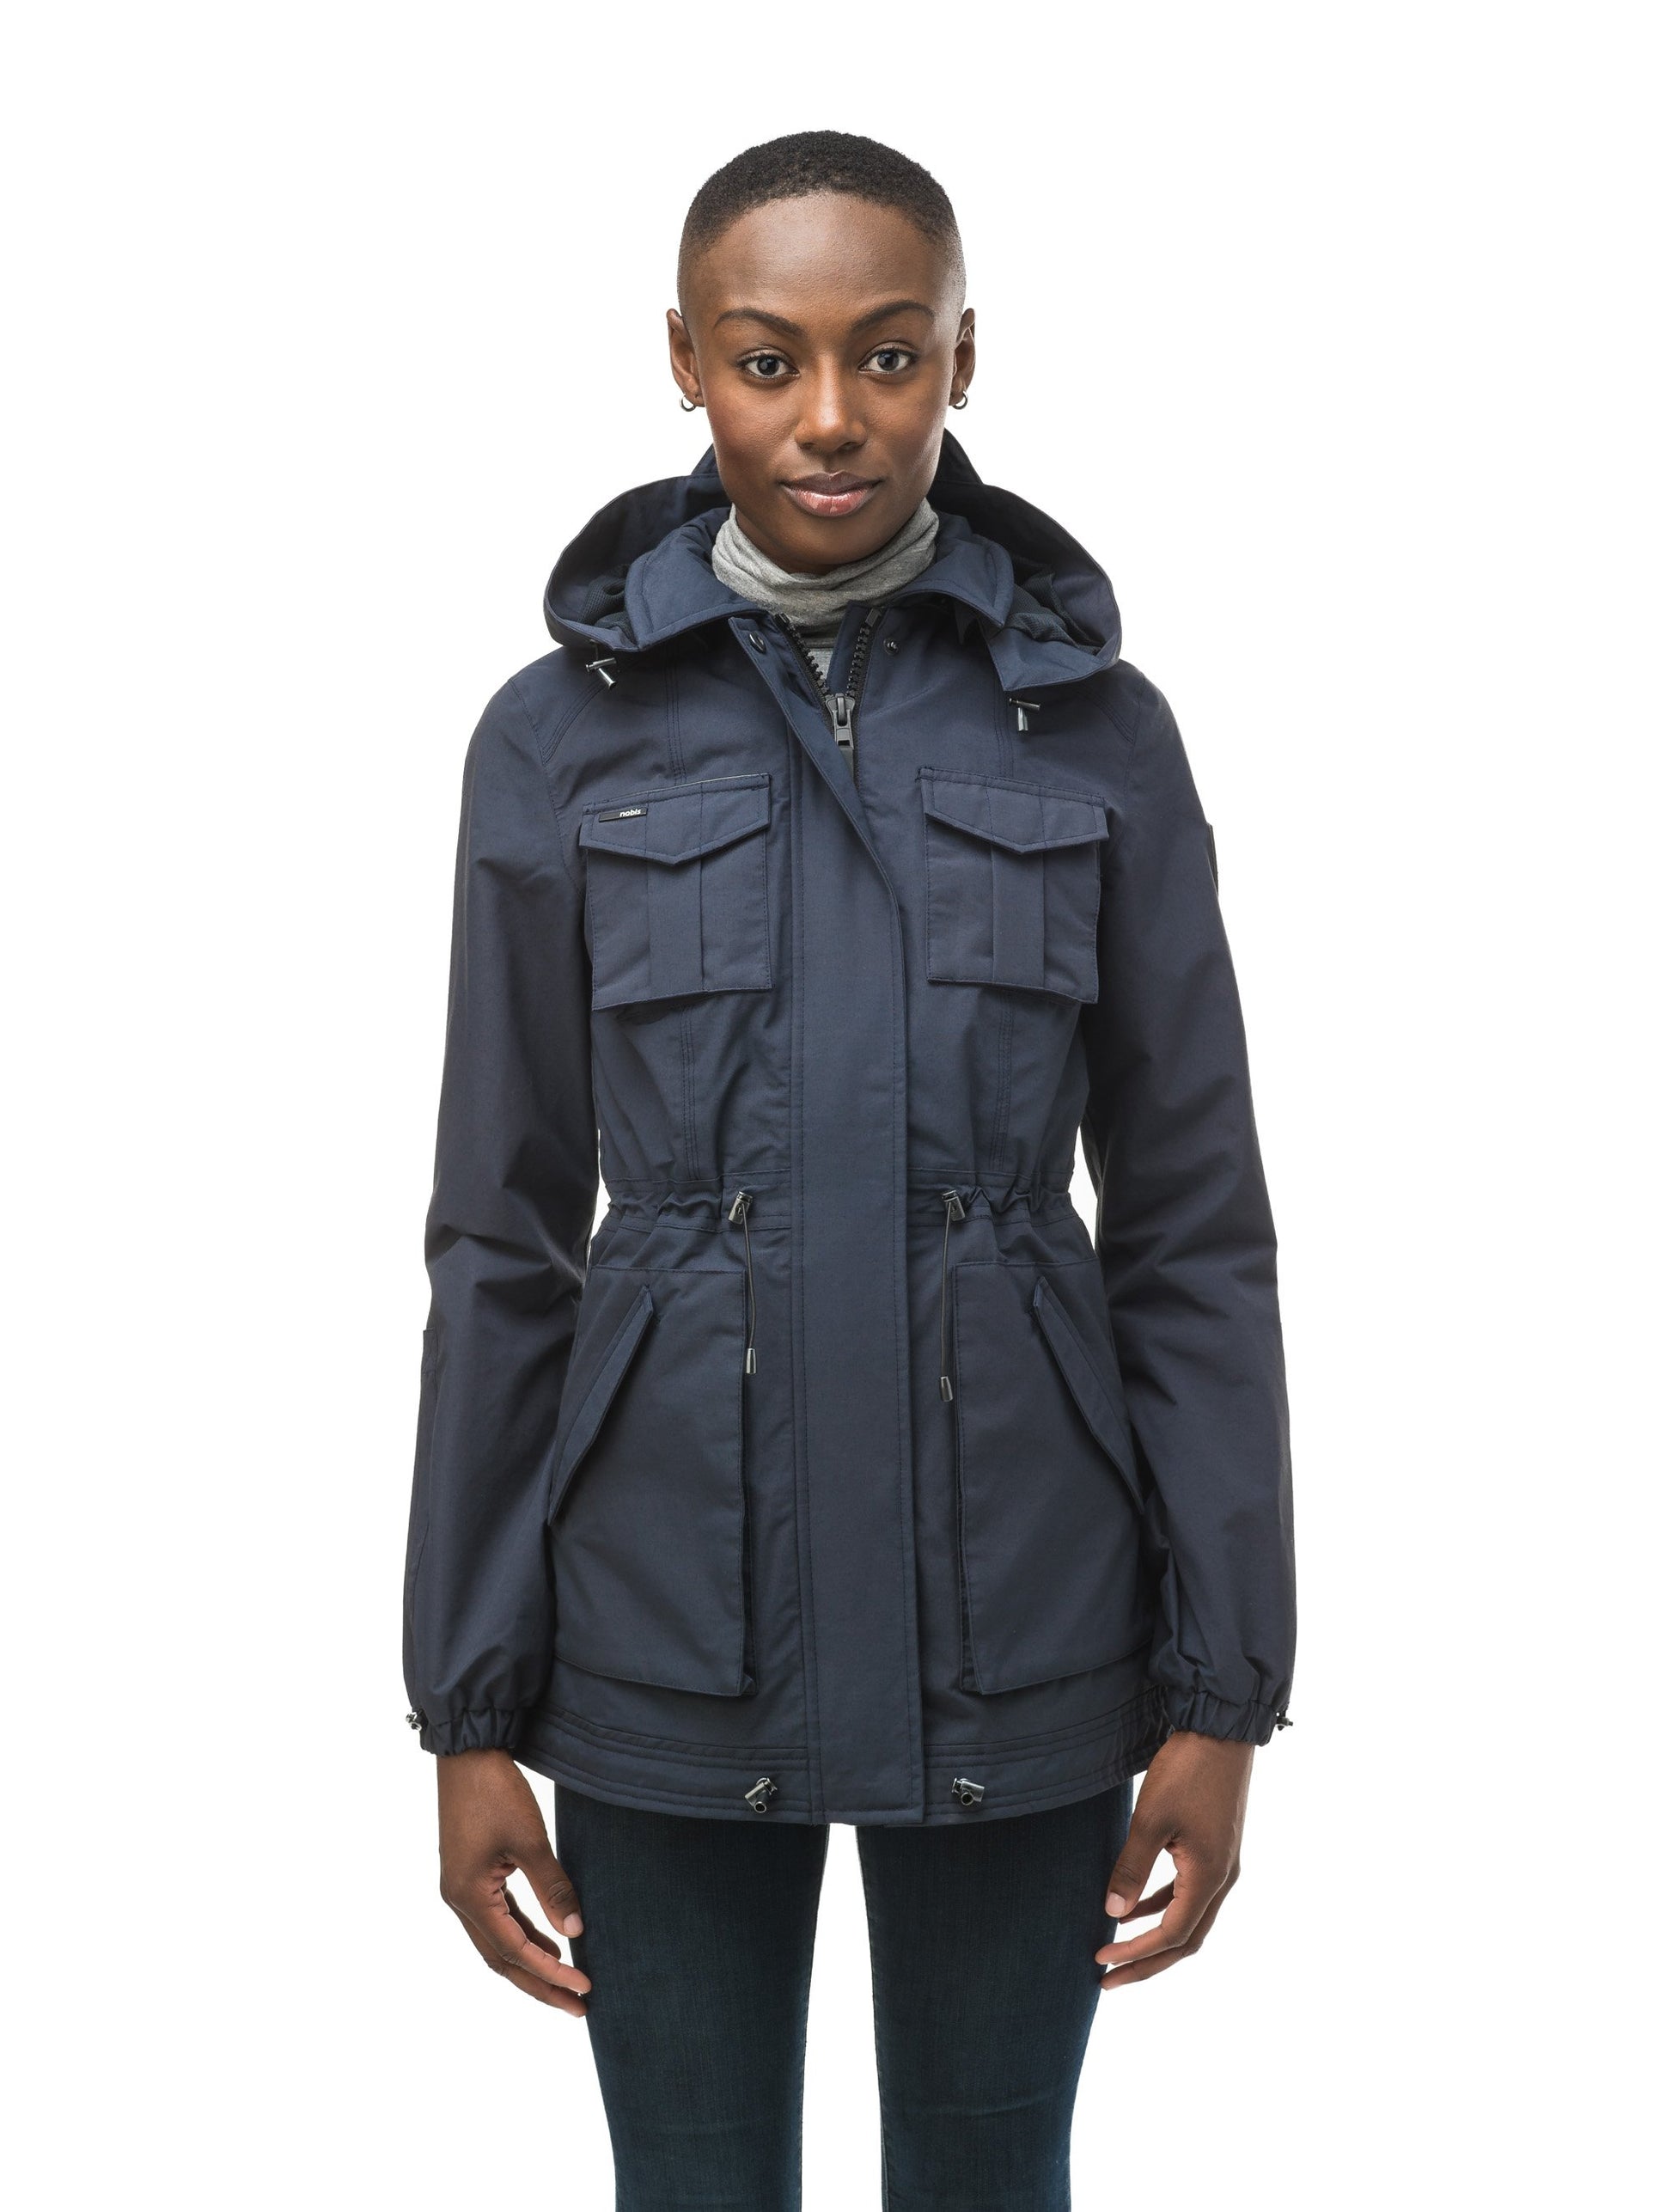 Women's hooded shirt jacket with four front pockets and adjustable waist in Navy